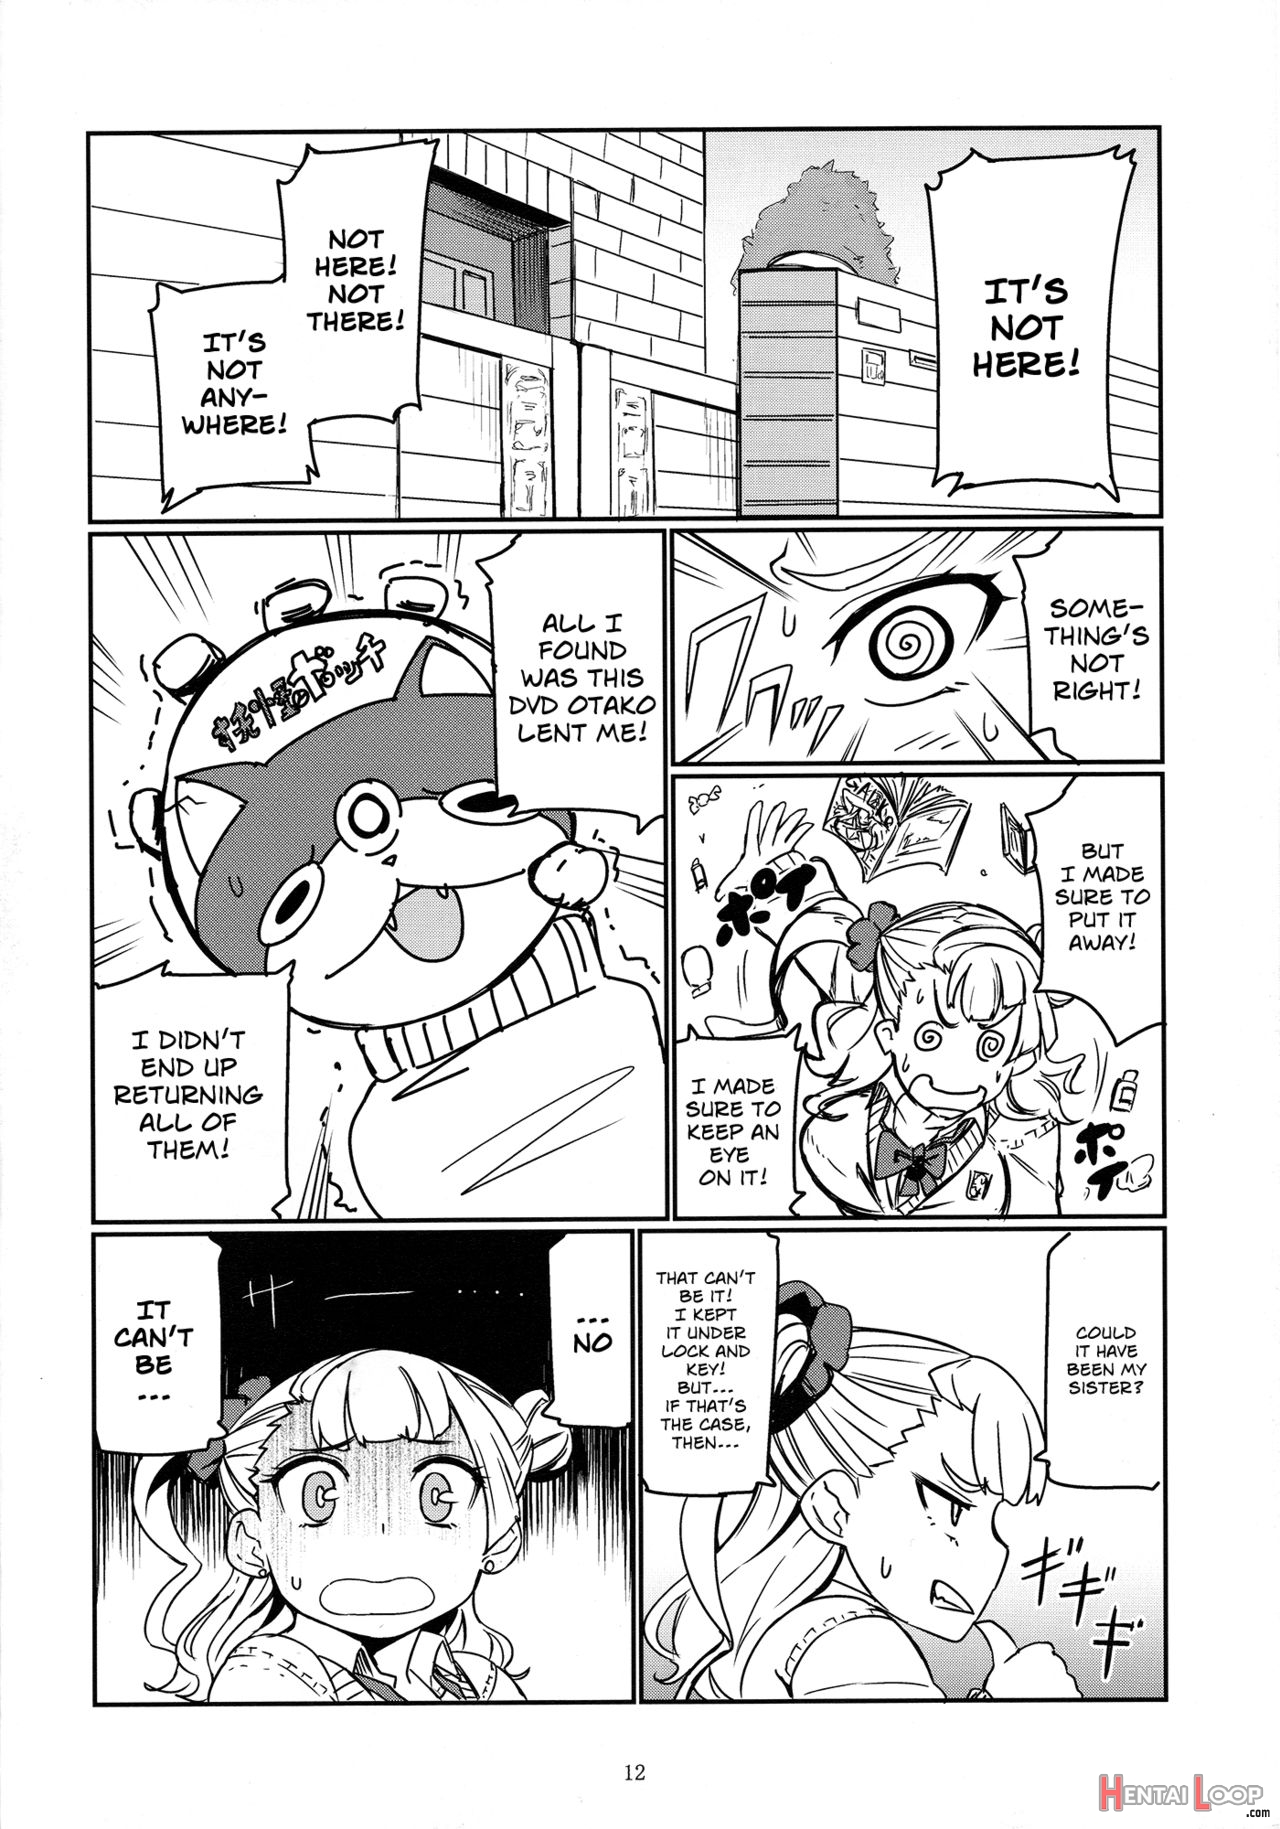 Galko Ah! page 11